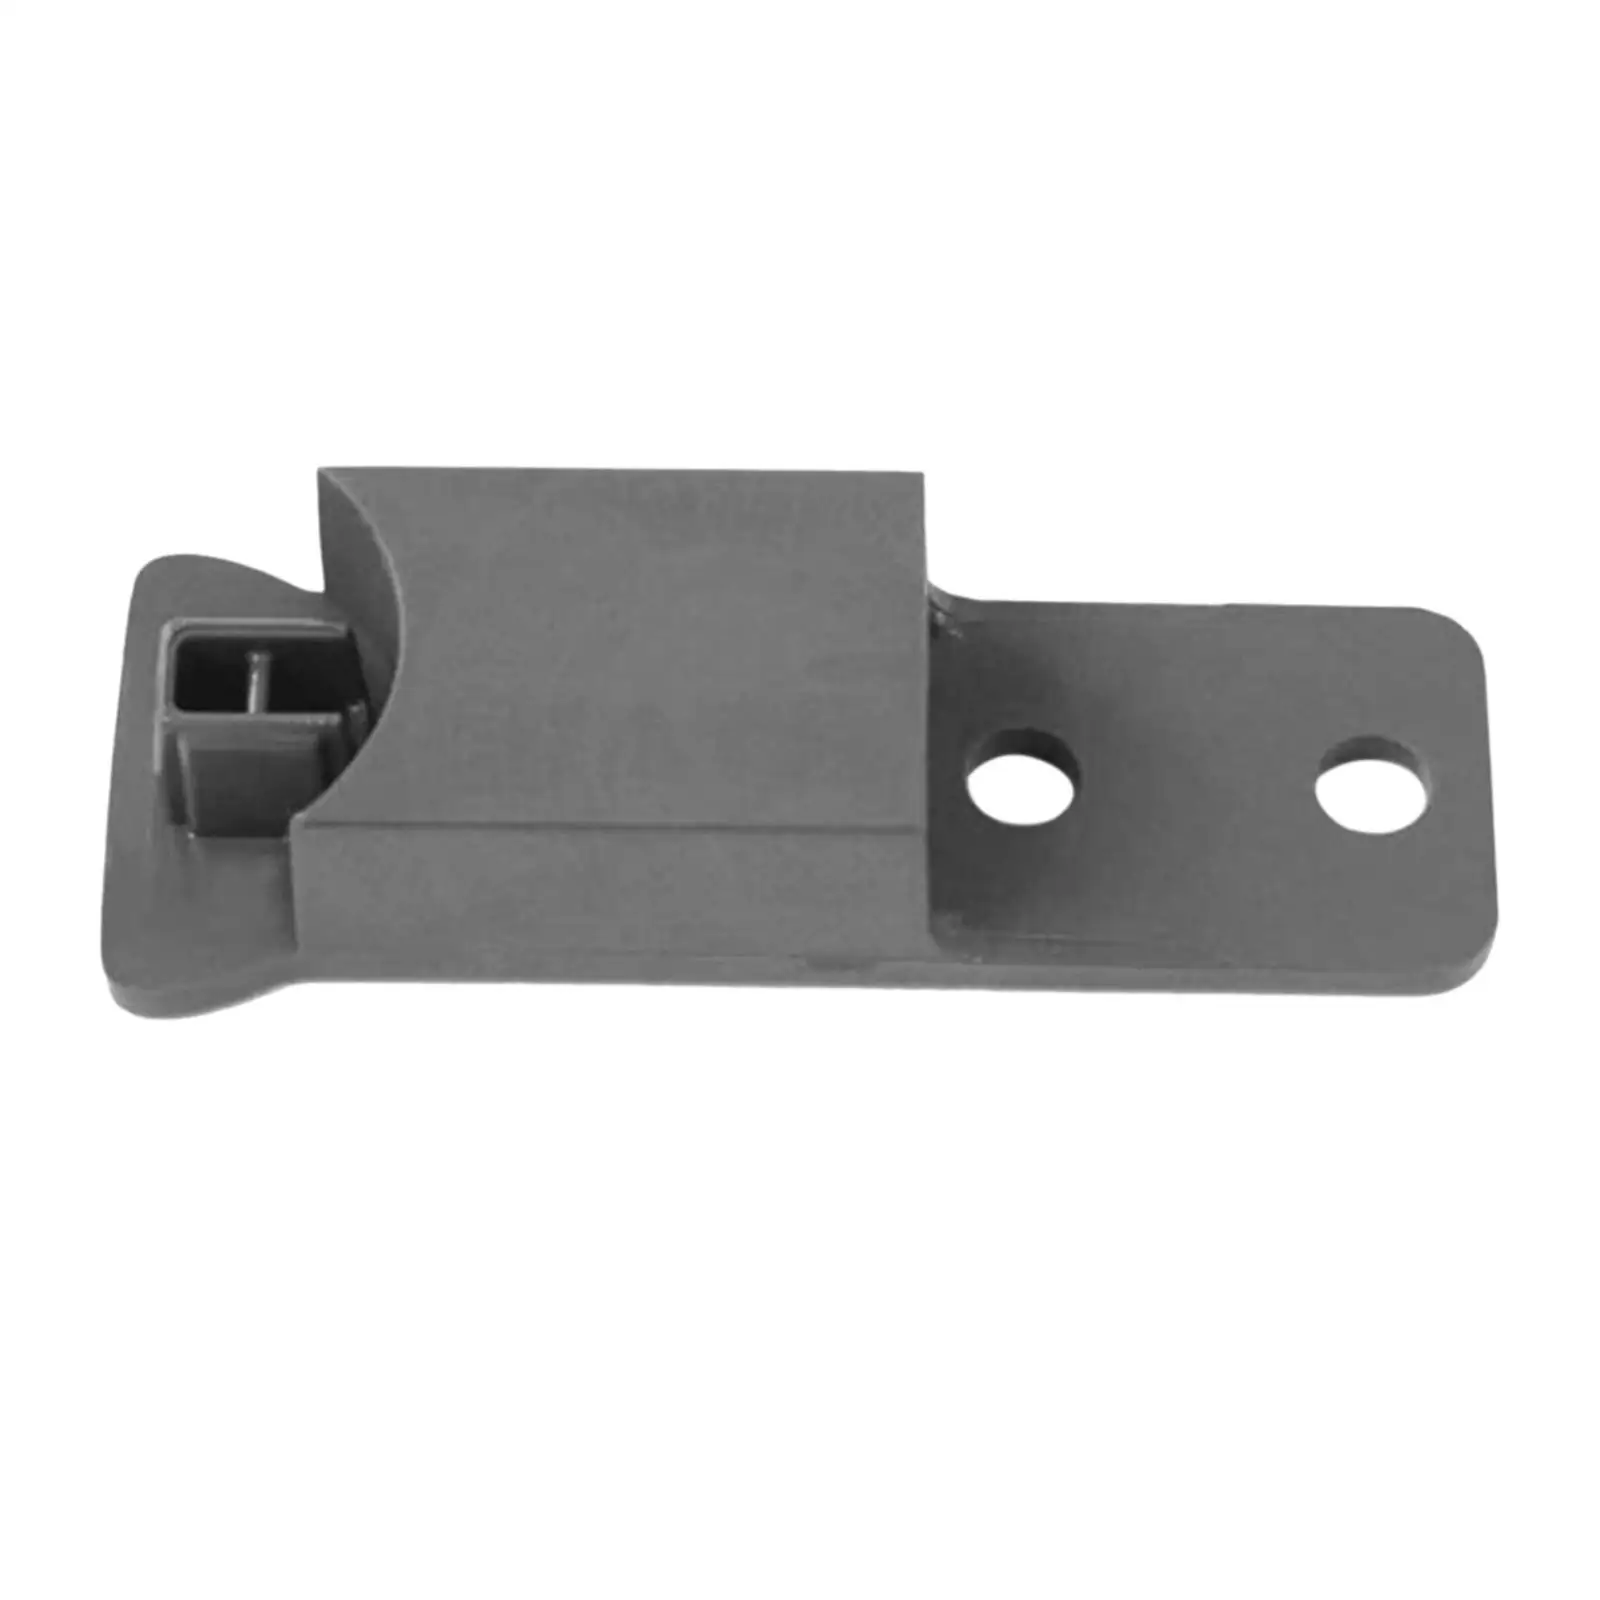 Handle End Cap Direct Replaces Accessories Appliance Cap W10838116 AP6036240 W10917049 for Whirlpool Refrigerator